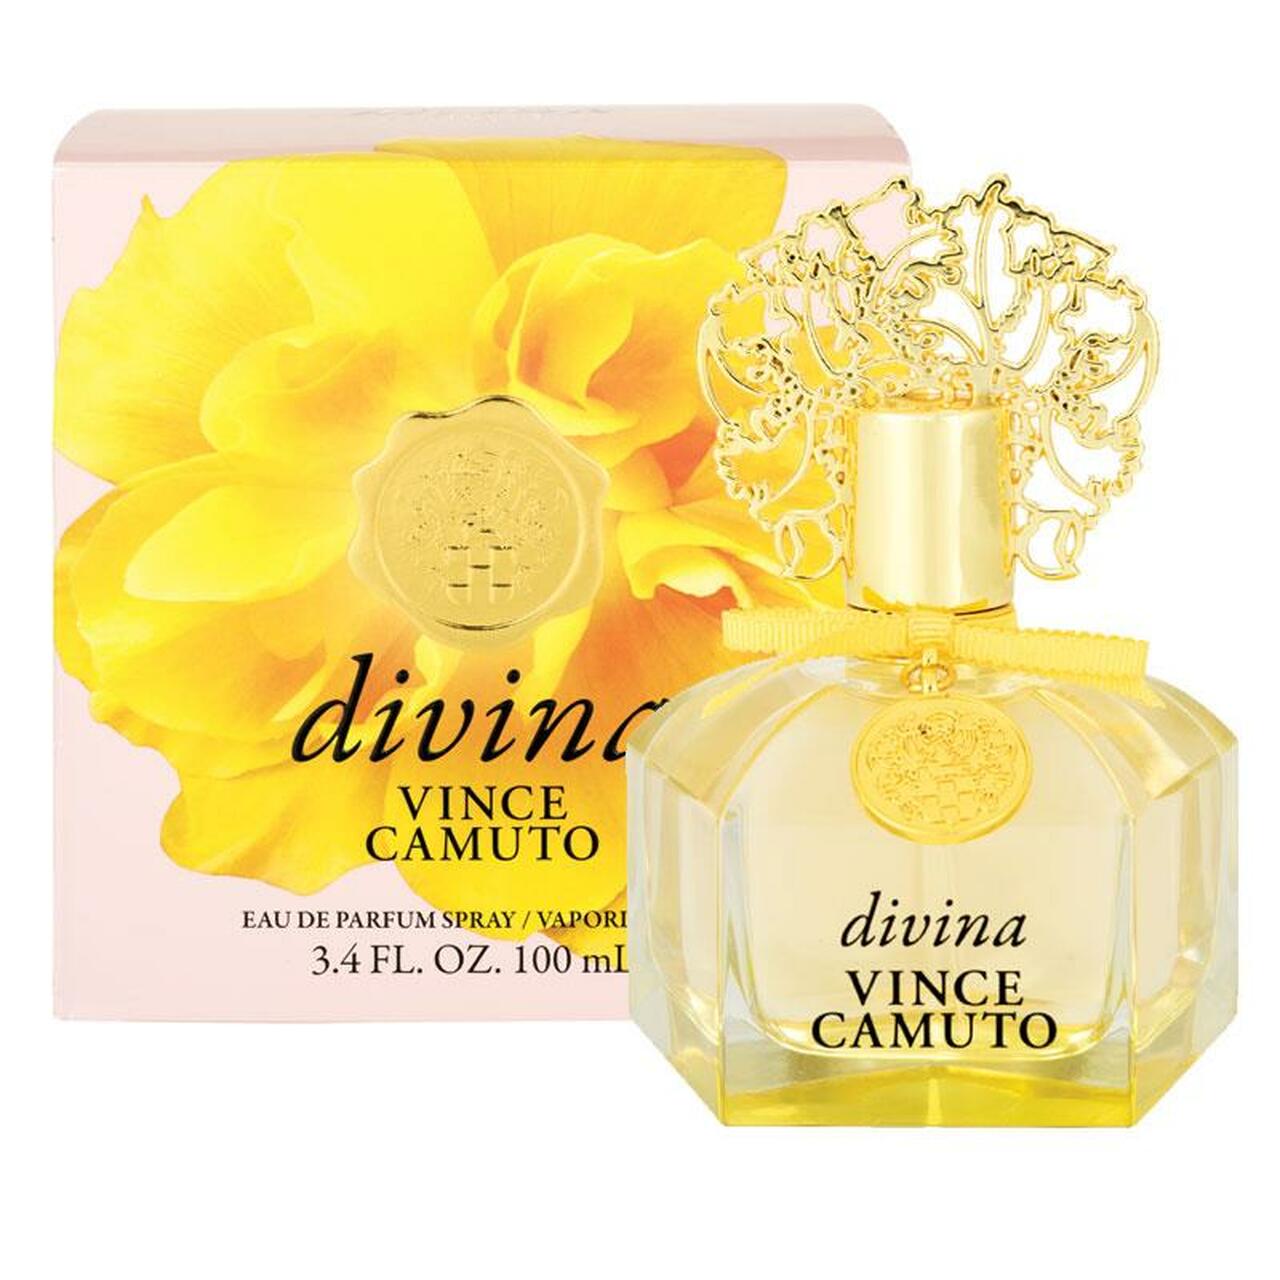 <span data-mce-fragment="1">The intense and lively scent of Divina is a tempting fragrance that comes to you from the design house of Vince Camuto. The sunny fragrance was launched in 2018. This feminine fragrance represents happiness and a sense of peace. At the top of this fruity-floral fragrance are notes from Blackcurrent and Grapefruit. The heart is resplendent with floral notes of Sunflower, Violet and Mimosa. The base is a content place with passionate tones from Sandalwood, Musk and Heliotrope.</span>